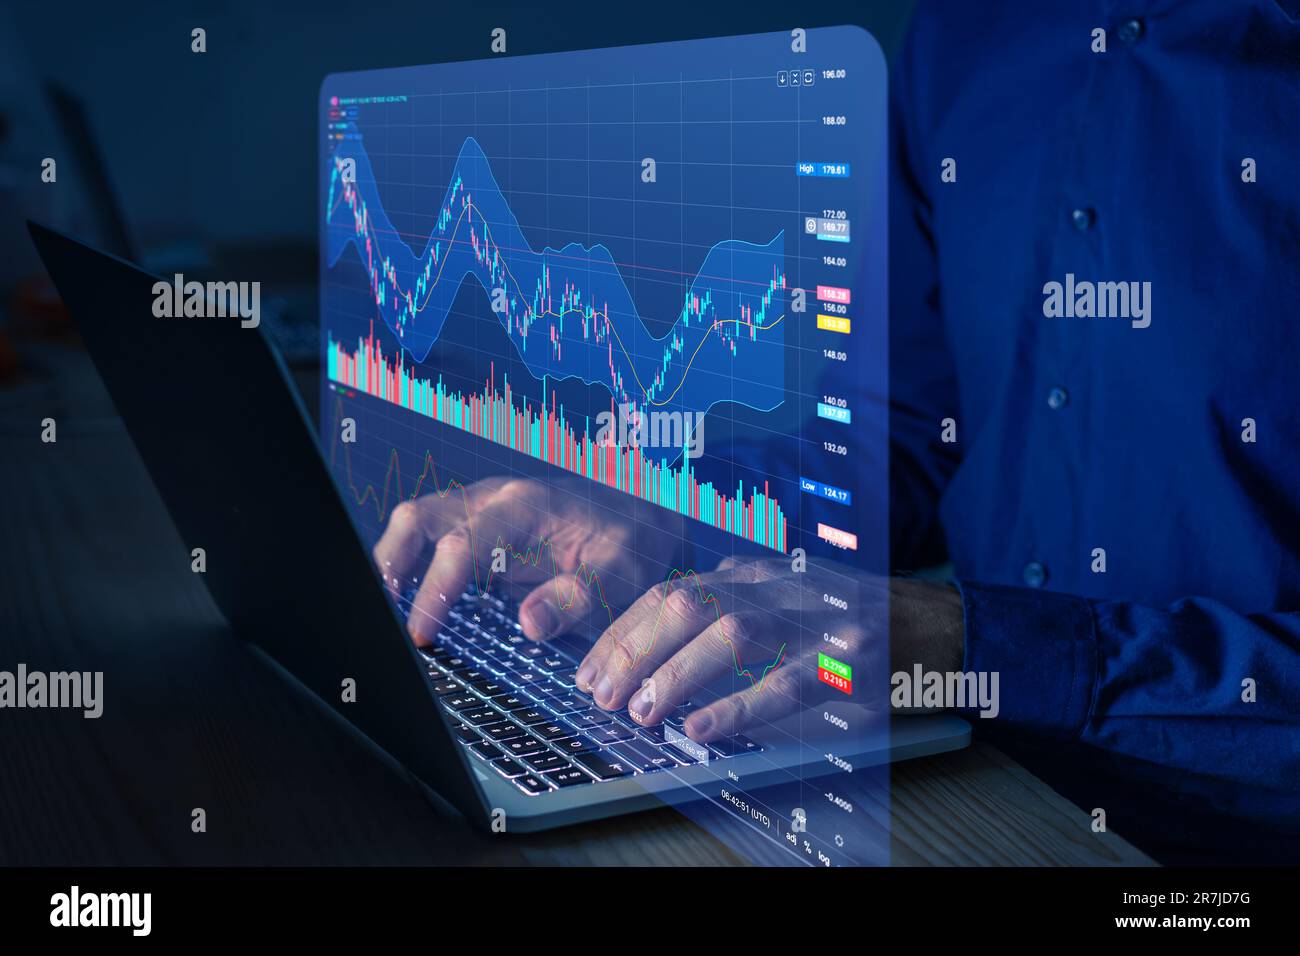 Stock exchange trading data and financial investment. Person using online trading interface with charts and statistics on computer screen to analyze E Stock Photo